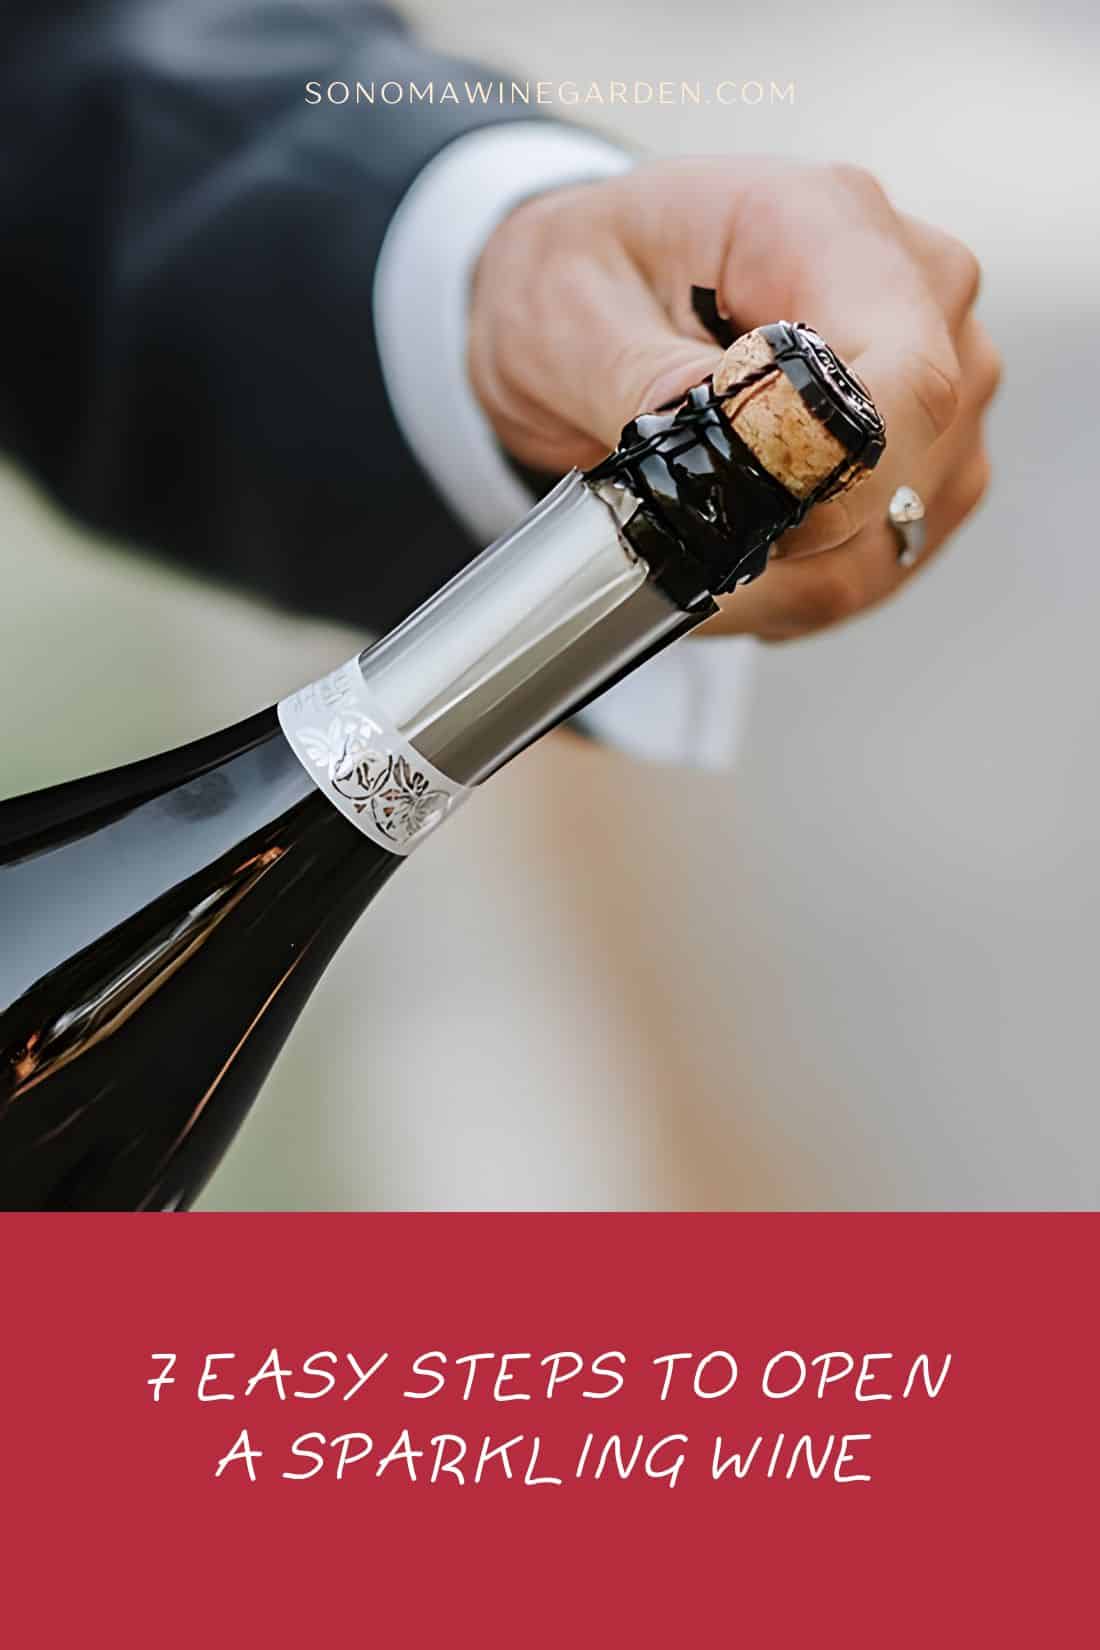 7 Easy Steps to Open a Sparkling Wine